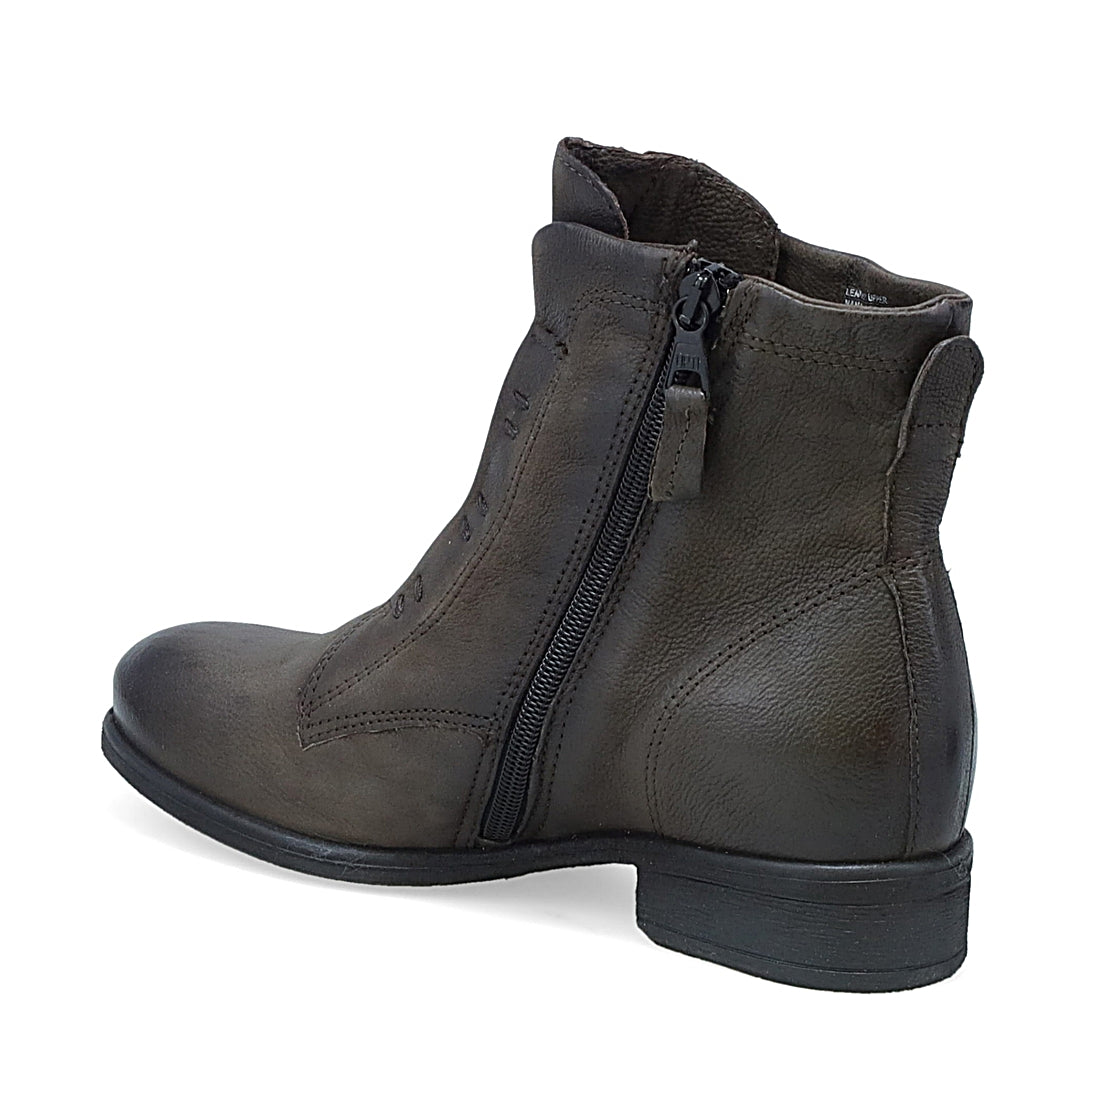 Inner side view of the miz mooz story ash ankle boot. This boot is grey with a slightly raised heel, a front zipper, and stitched detailing.